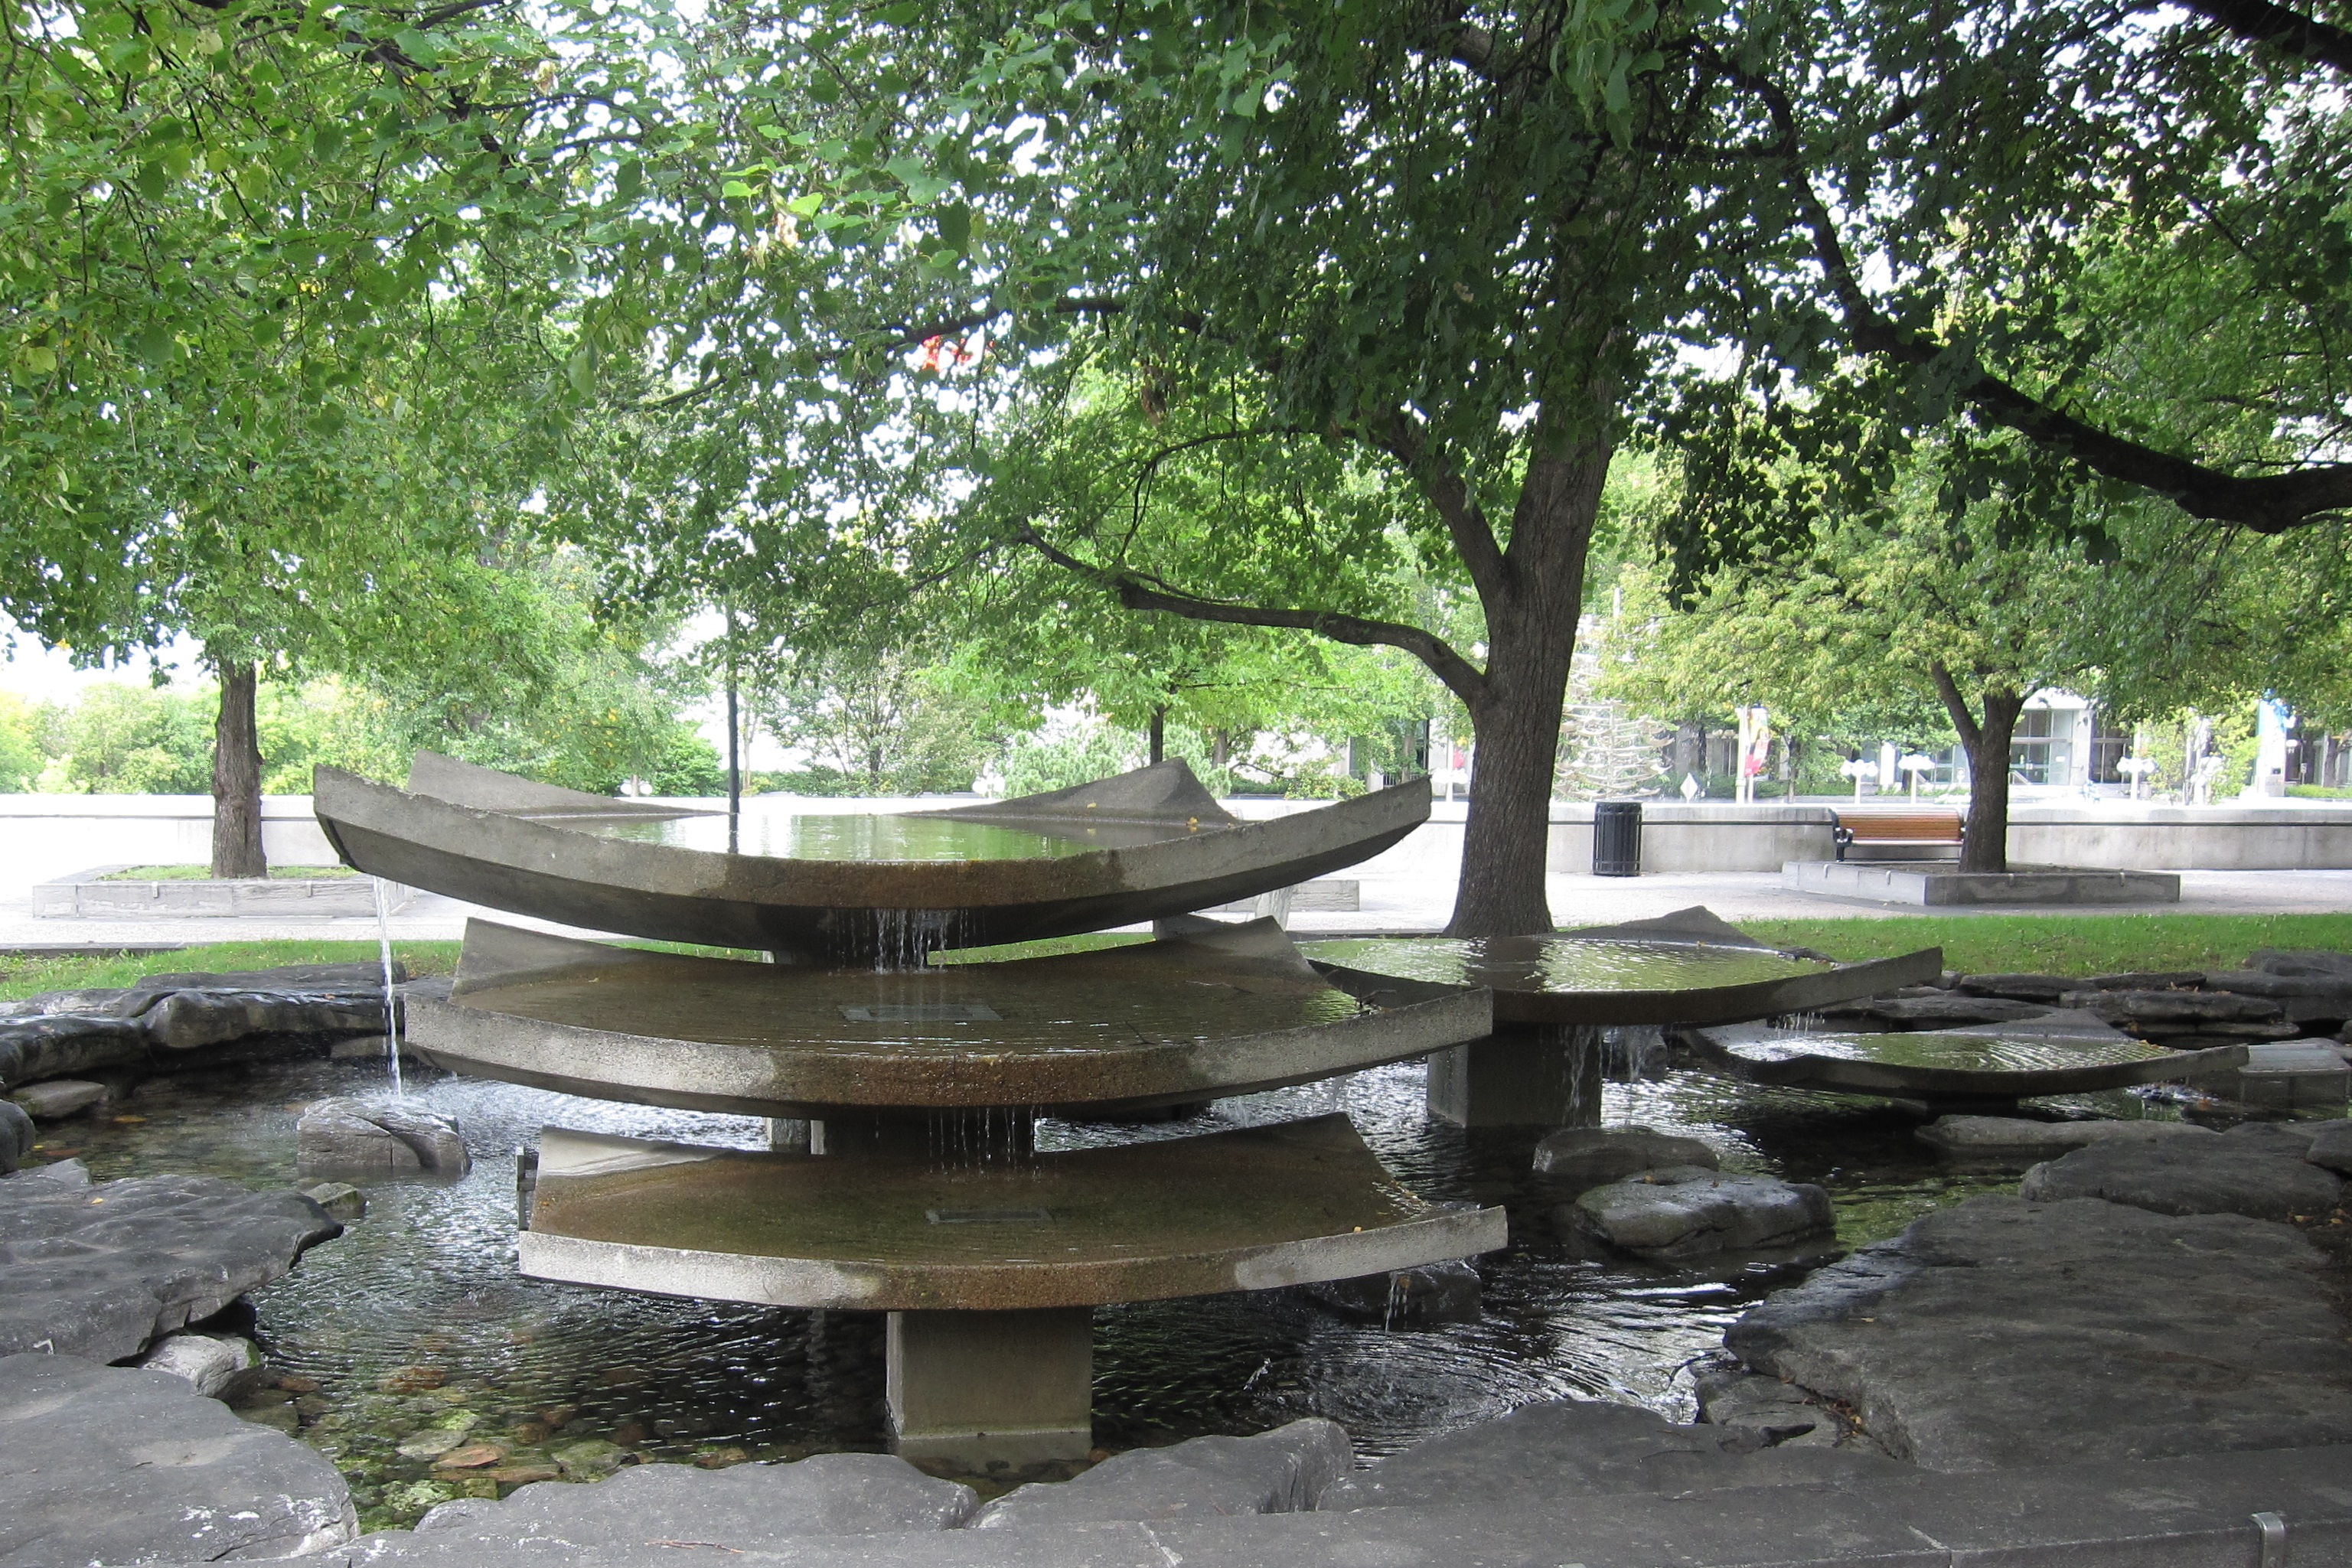 Photo of a sculpture in the shape of a tree with a fountain running through it.